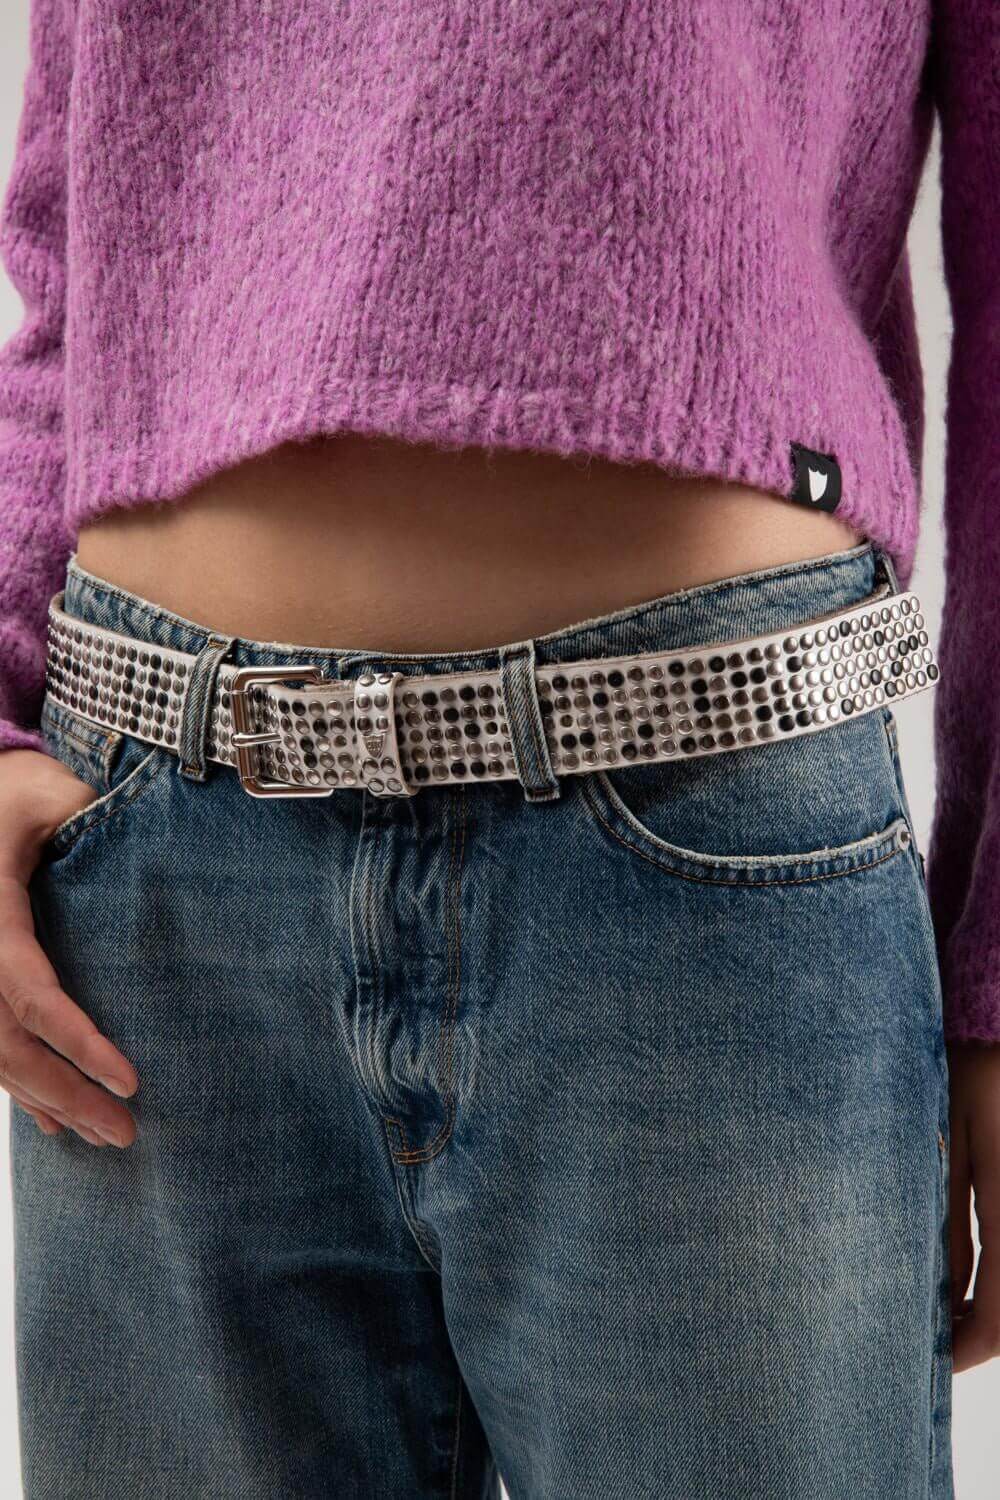 5.000 STUDS BELT Leather belt with mixed studs, brass buckle, studded zamac belt loop with HTC logo rivet. Height: 3.5 cm. Made in Italy. HTC LOS ANGELES